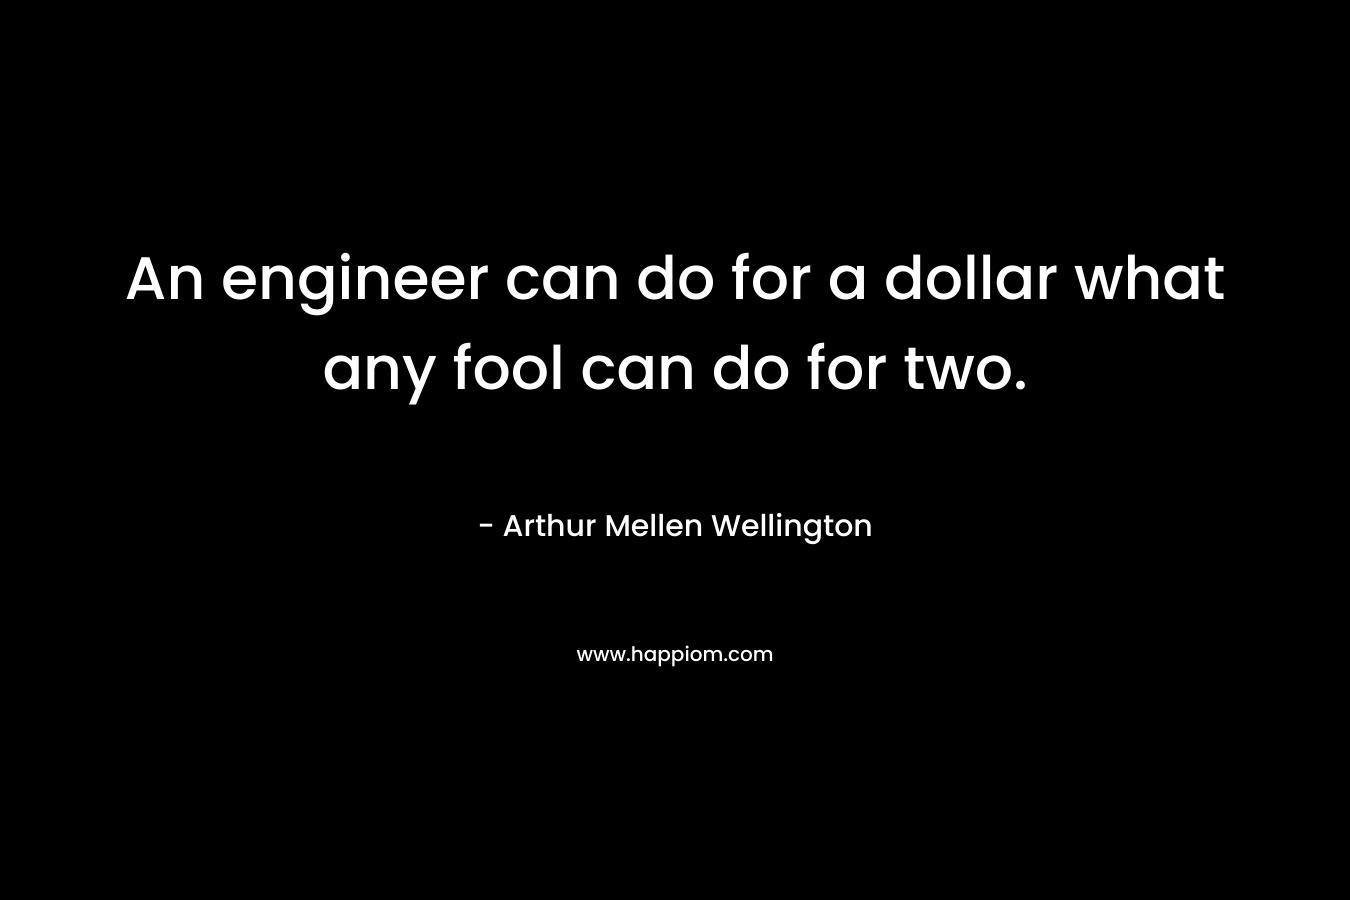 An engineer can do for a dollar what any fool can do for two. – Arthur Mellen Wellington